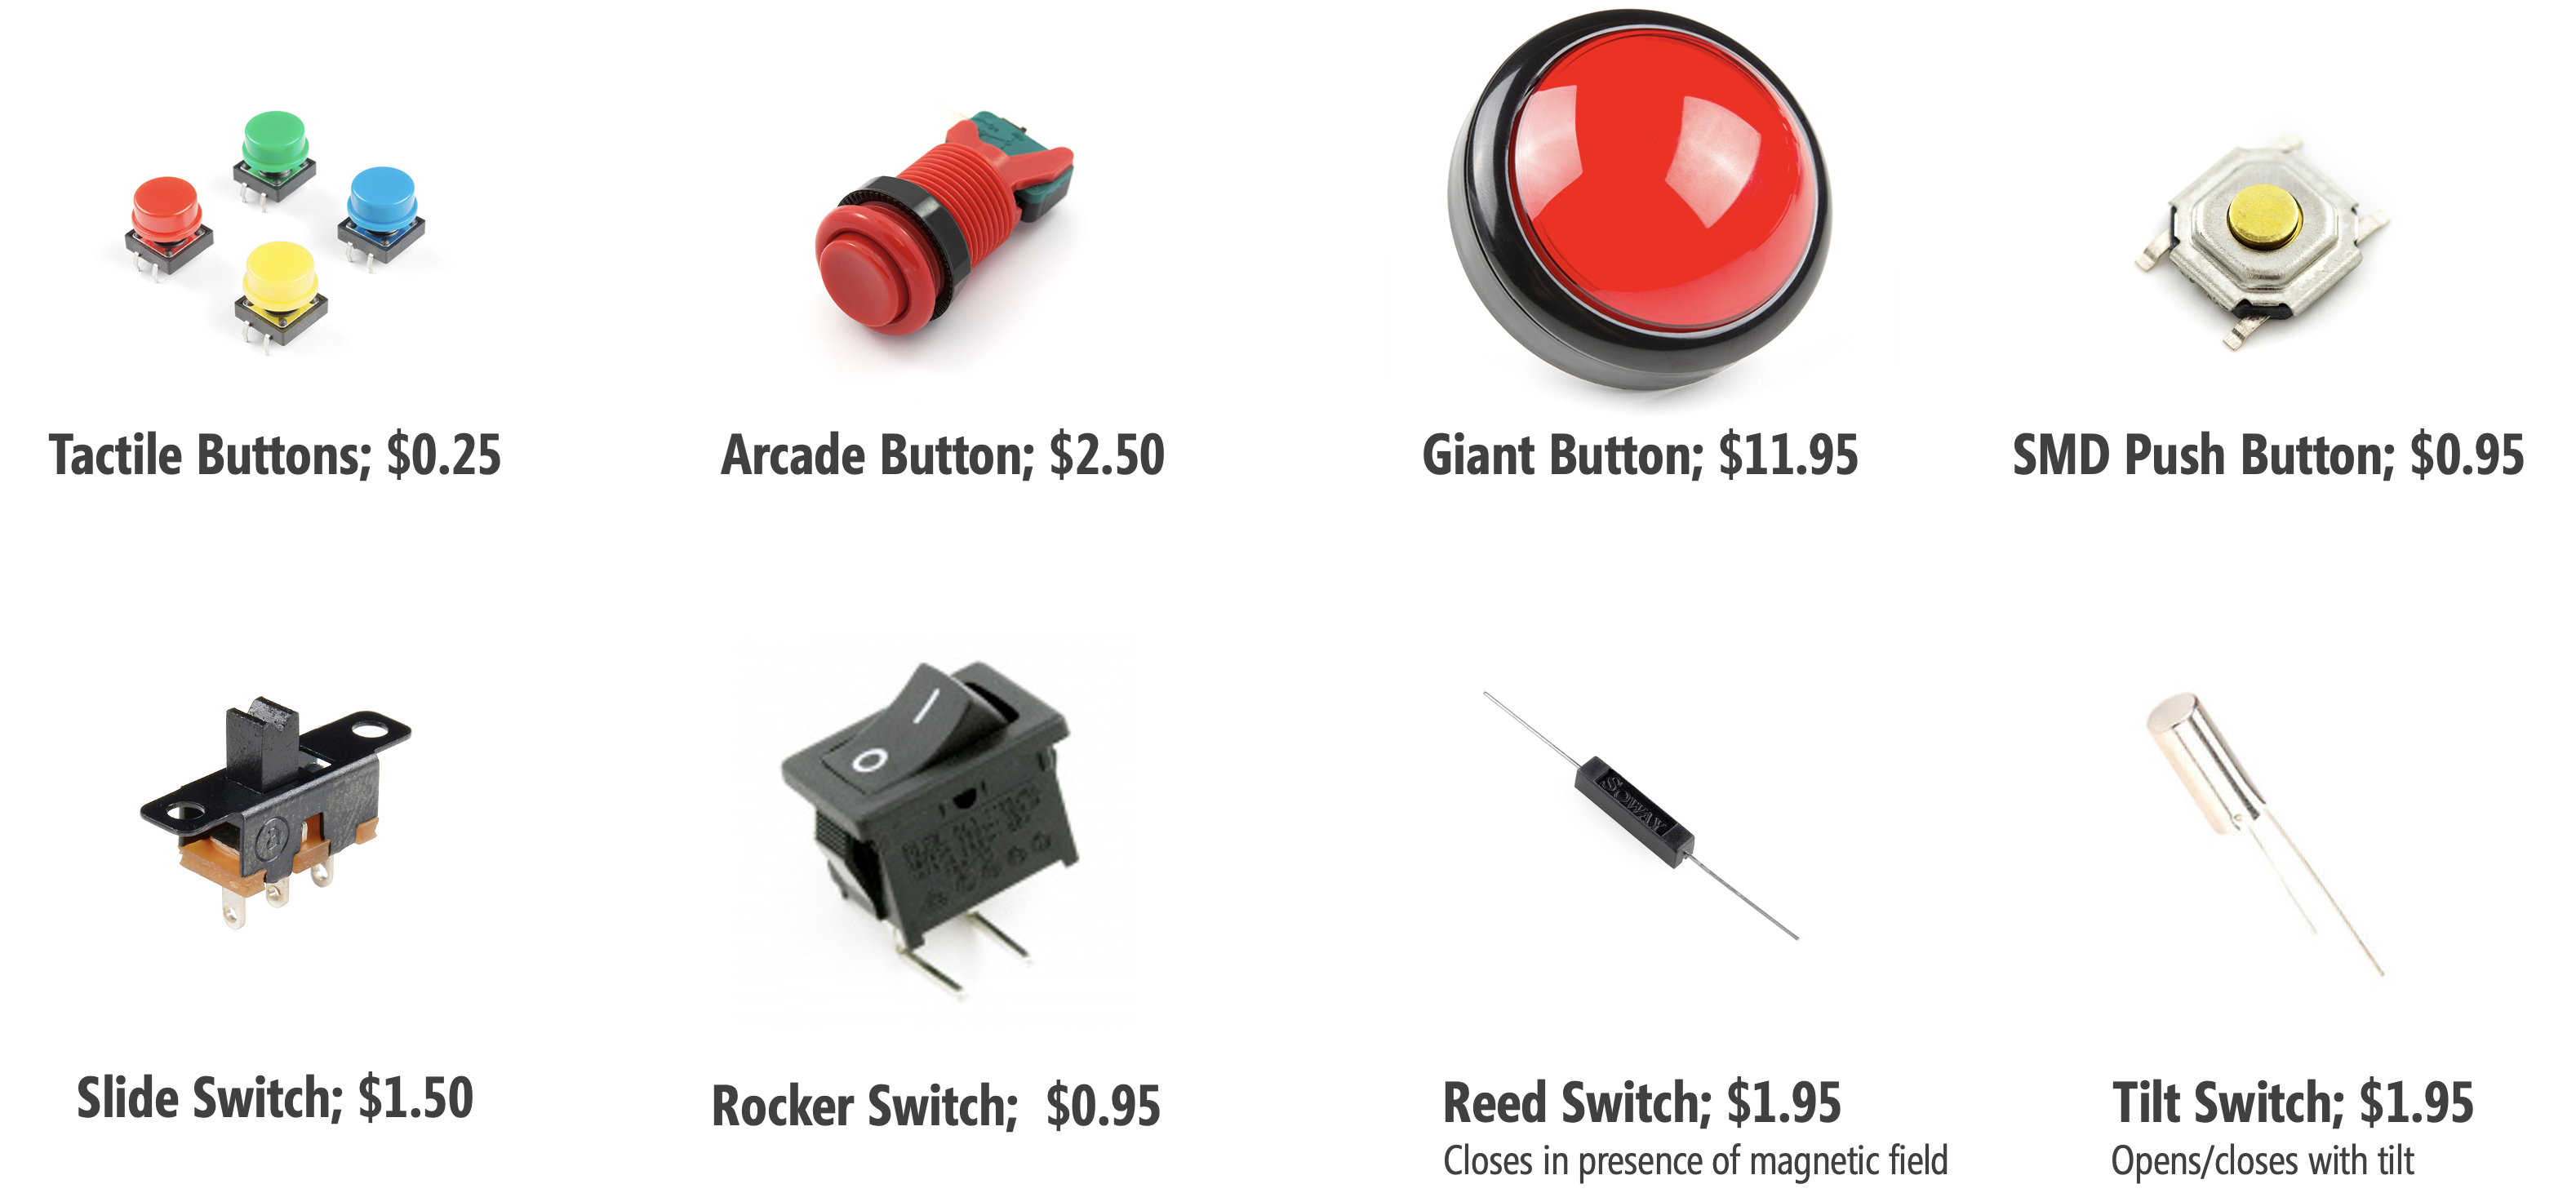 Picture showing a variety of digital inputs, including tactile buttons, arcade buttons, SMD push buttons, slide switches, rocker switches, reed switches, and tilt switches